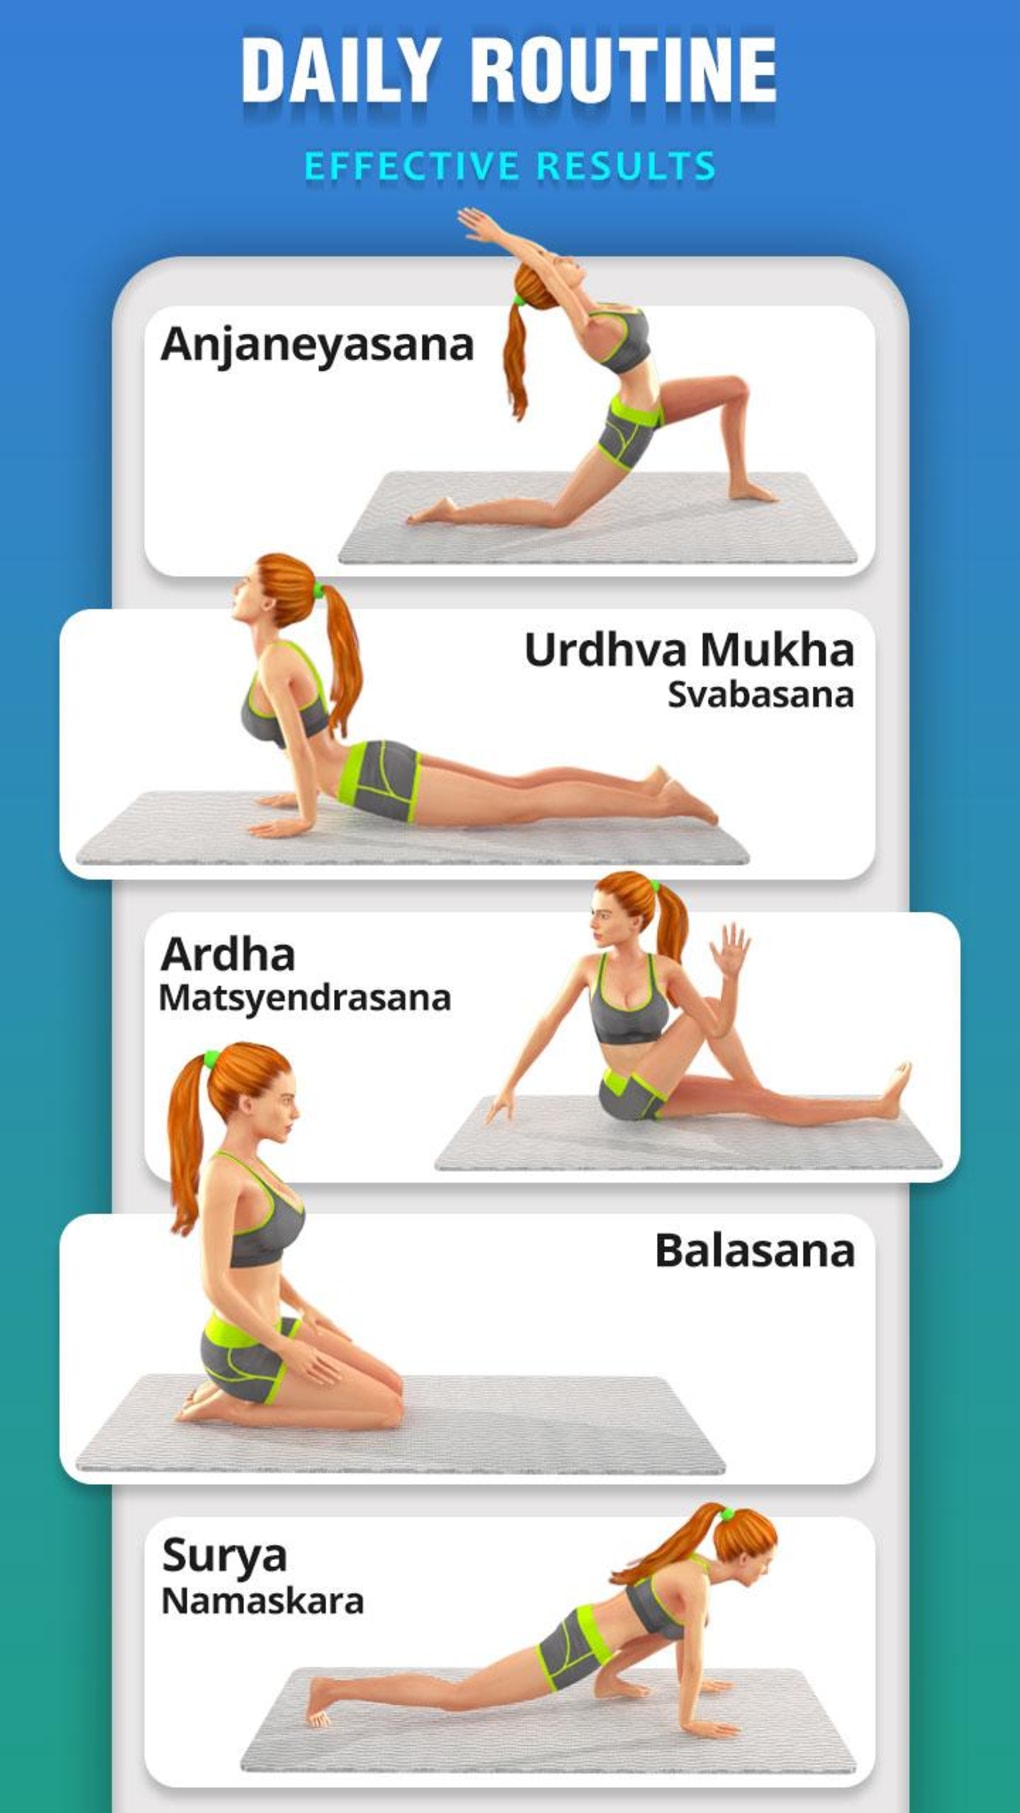 Yoga for Weight Loss - Daily Yoga Workout Plan APK Download